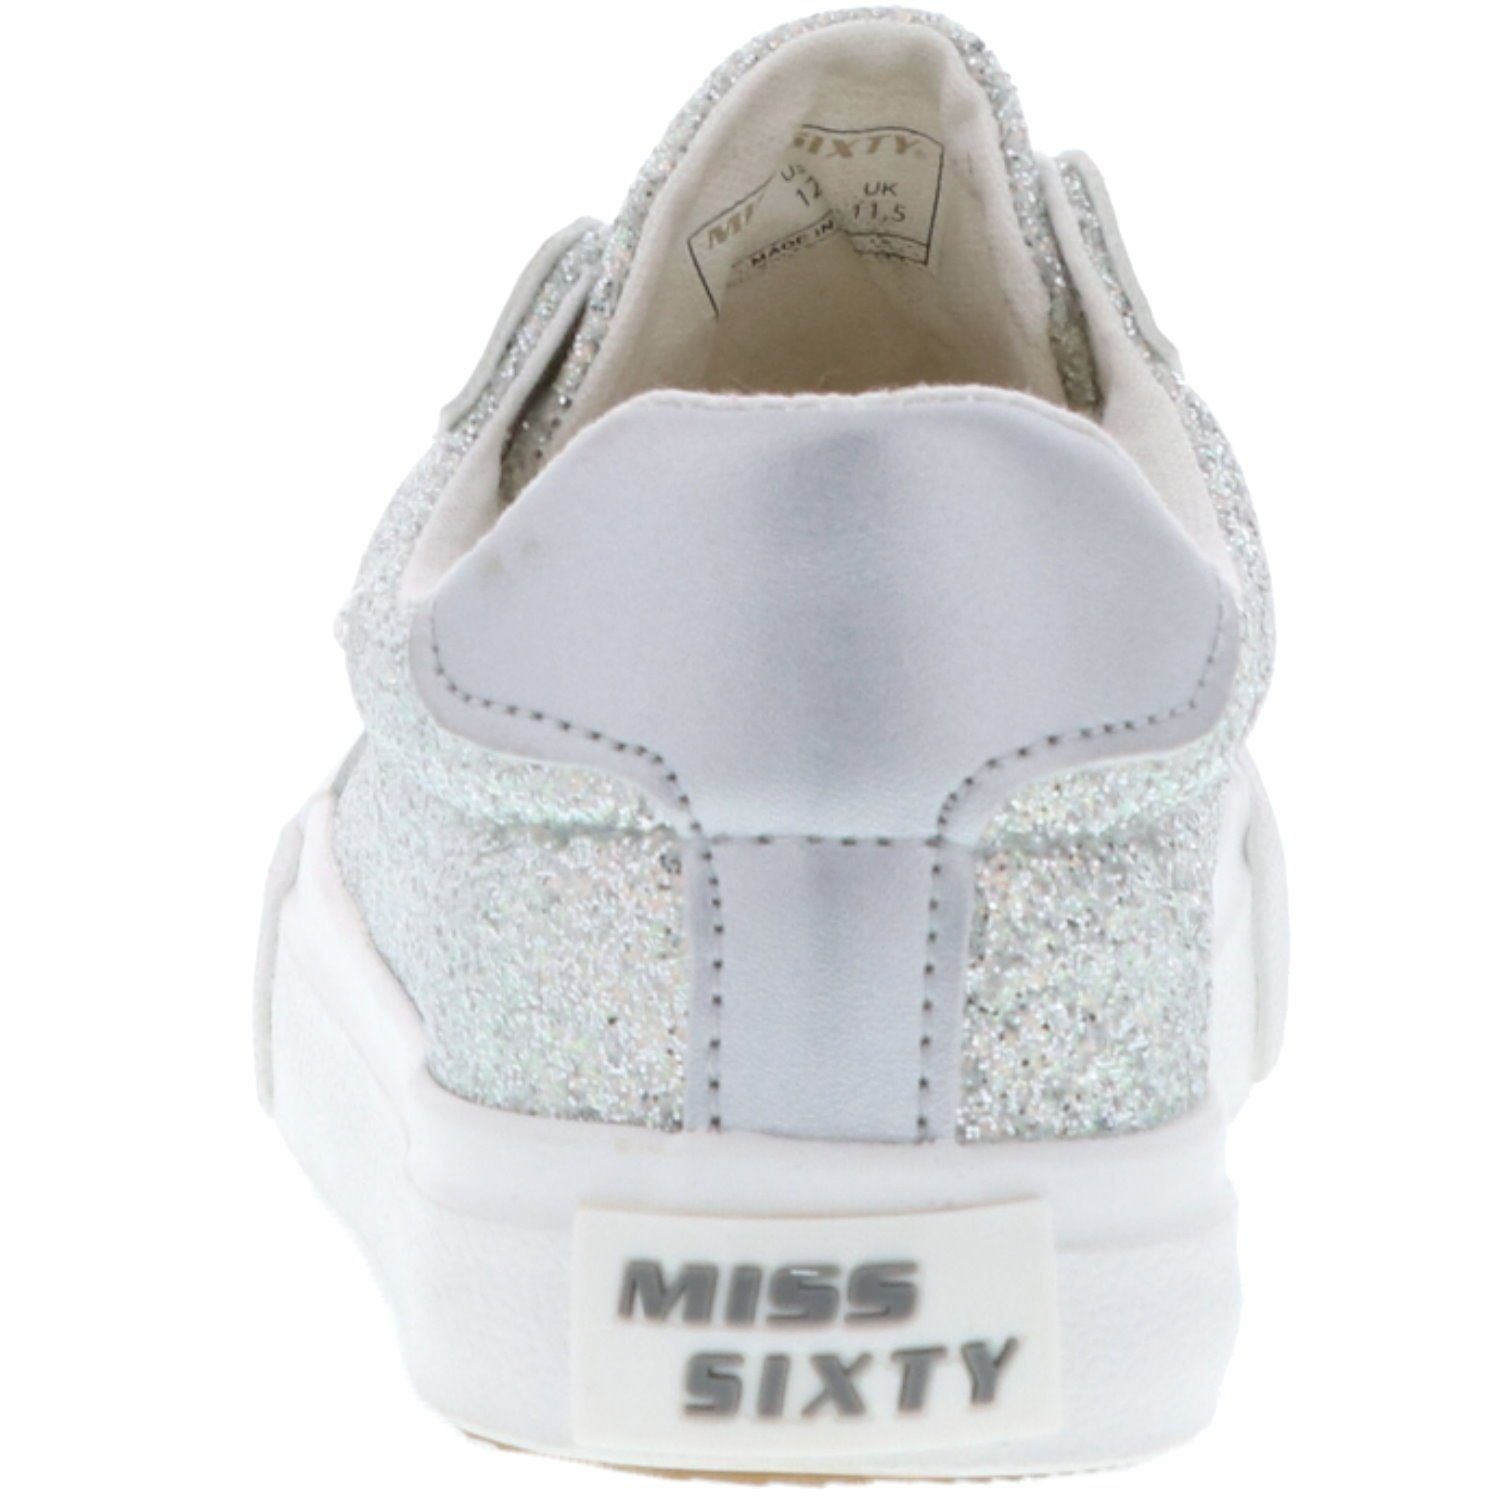 60 S19 522 MISS MS Silver S19-SMS522 Ver.:150 Schnürschuh /S SIXTY